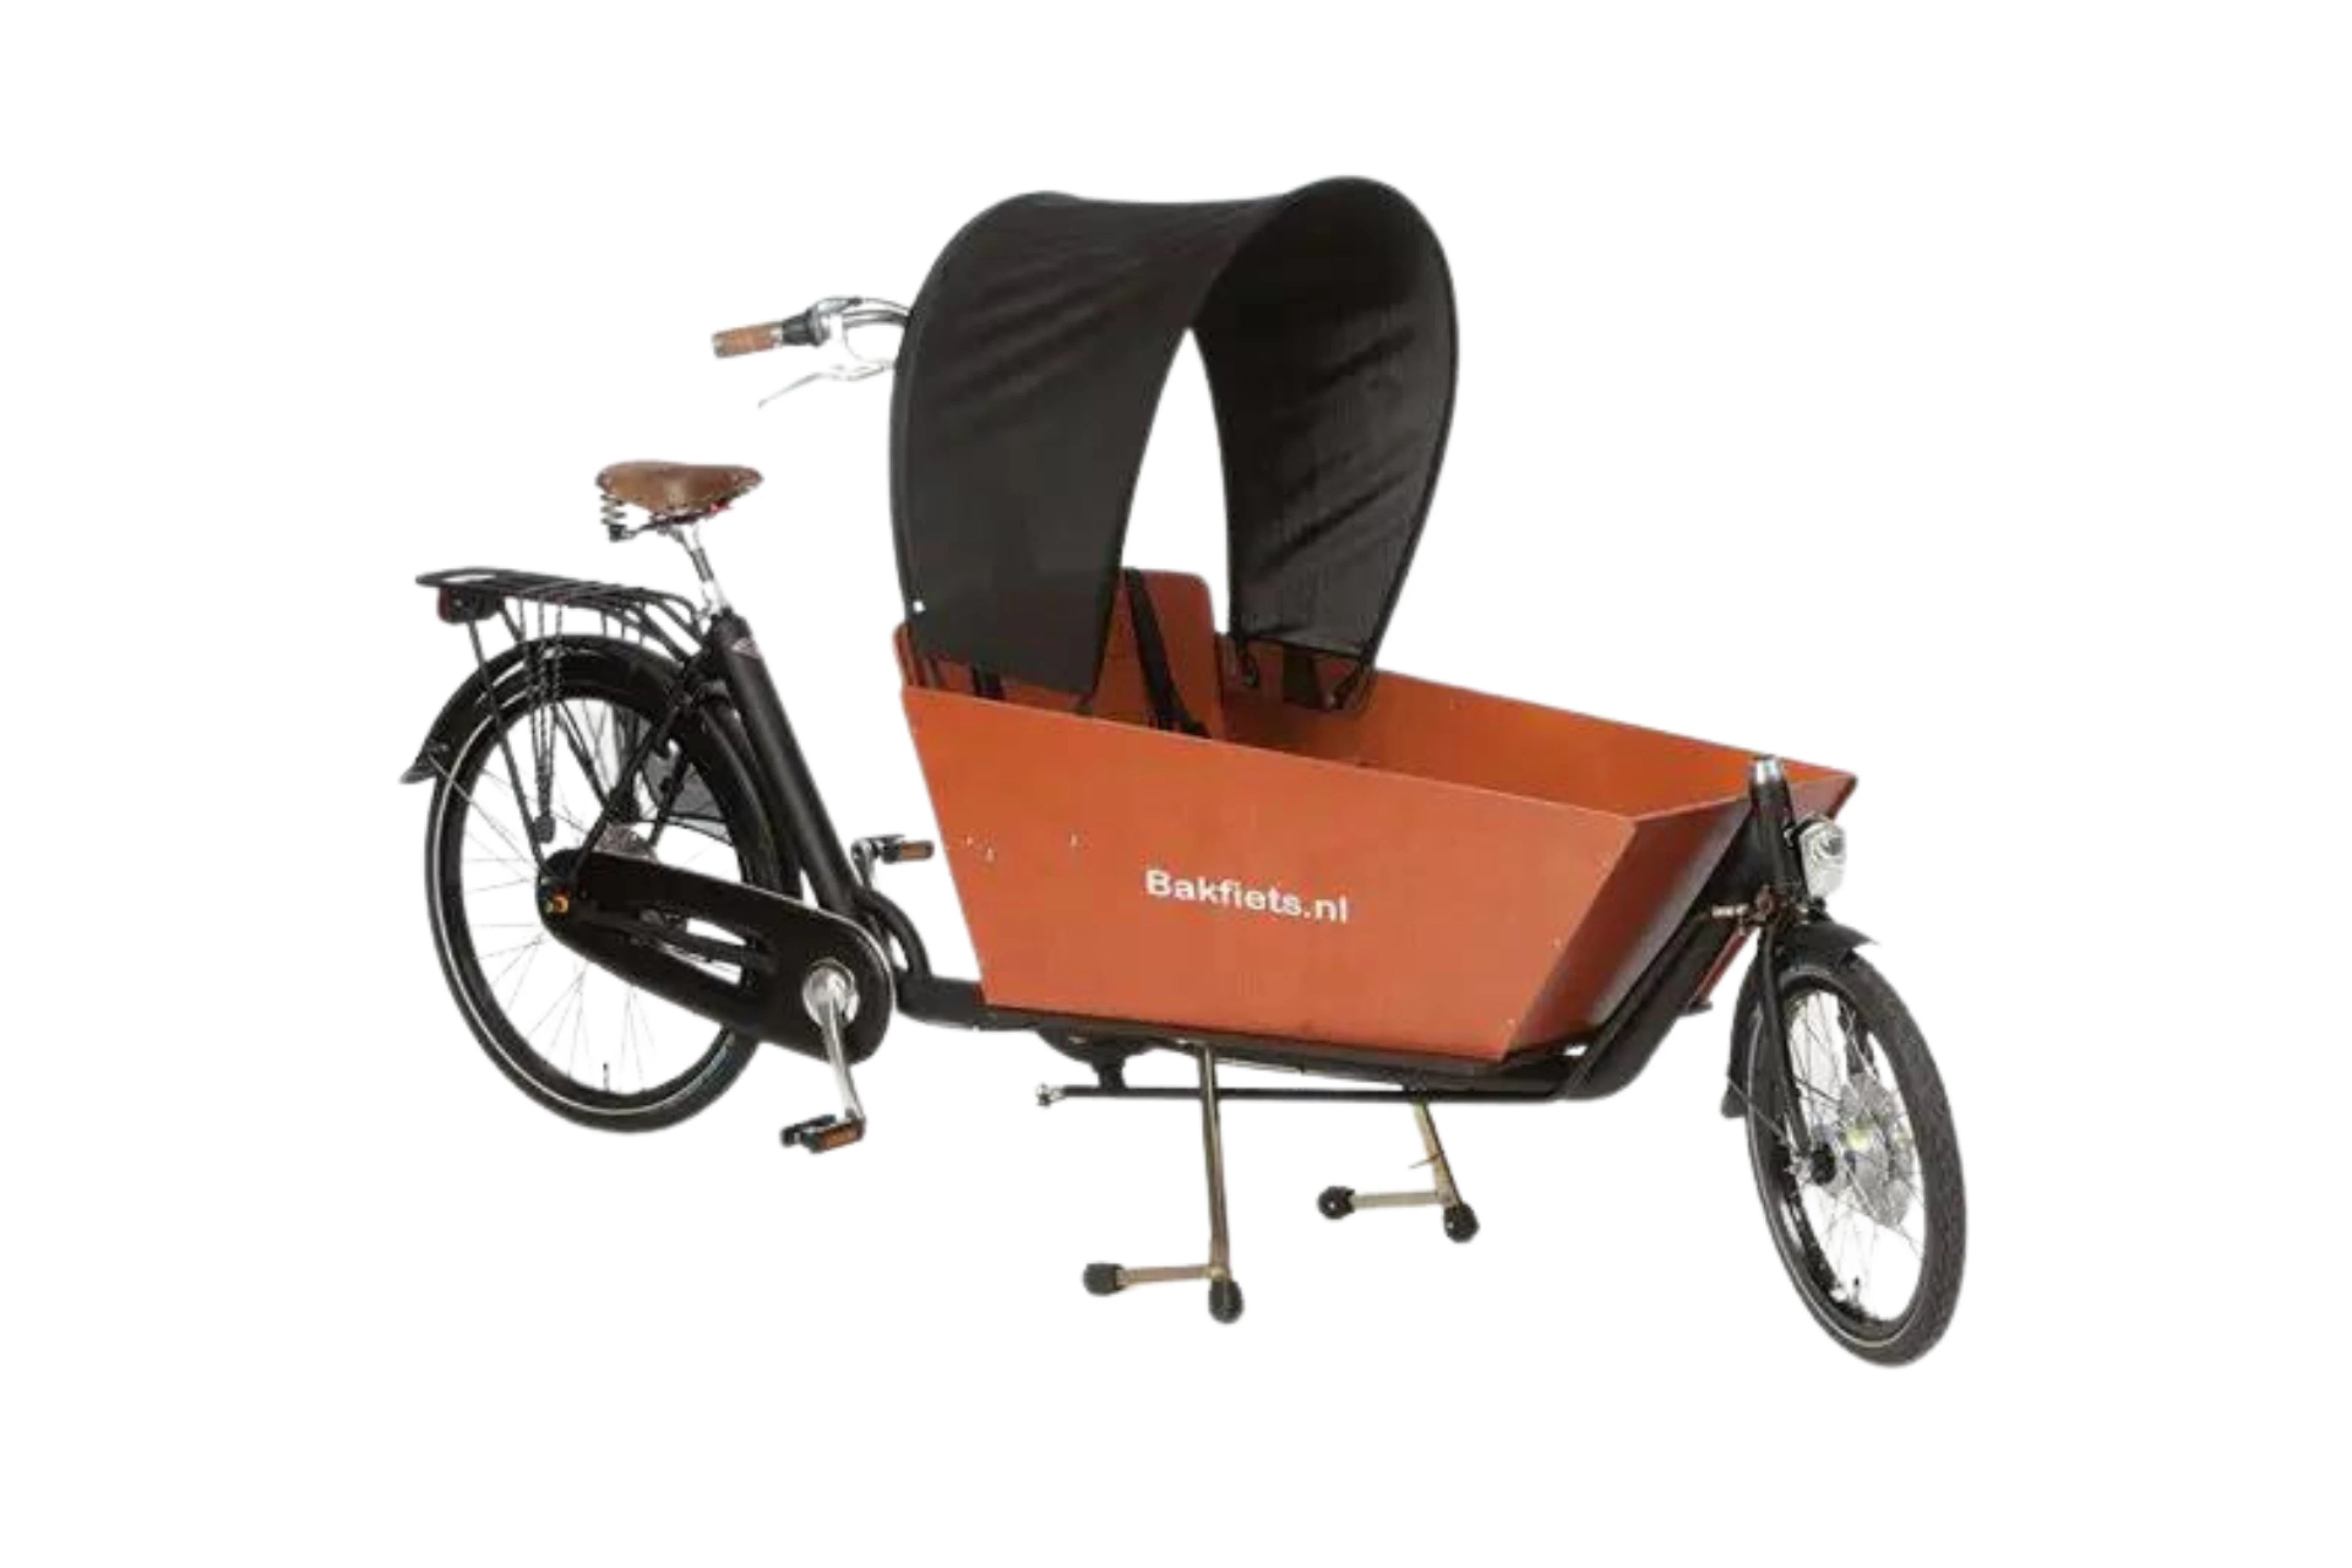 Bakfiets.nl Sun Cover